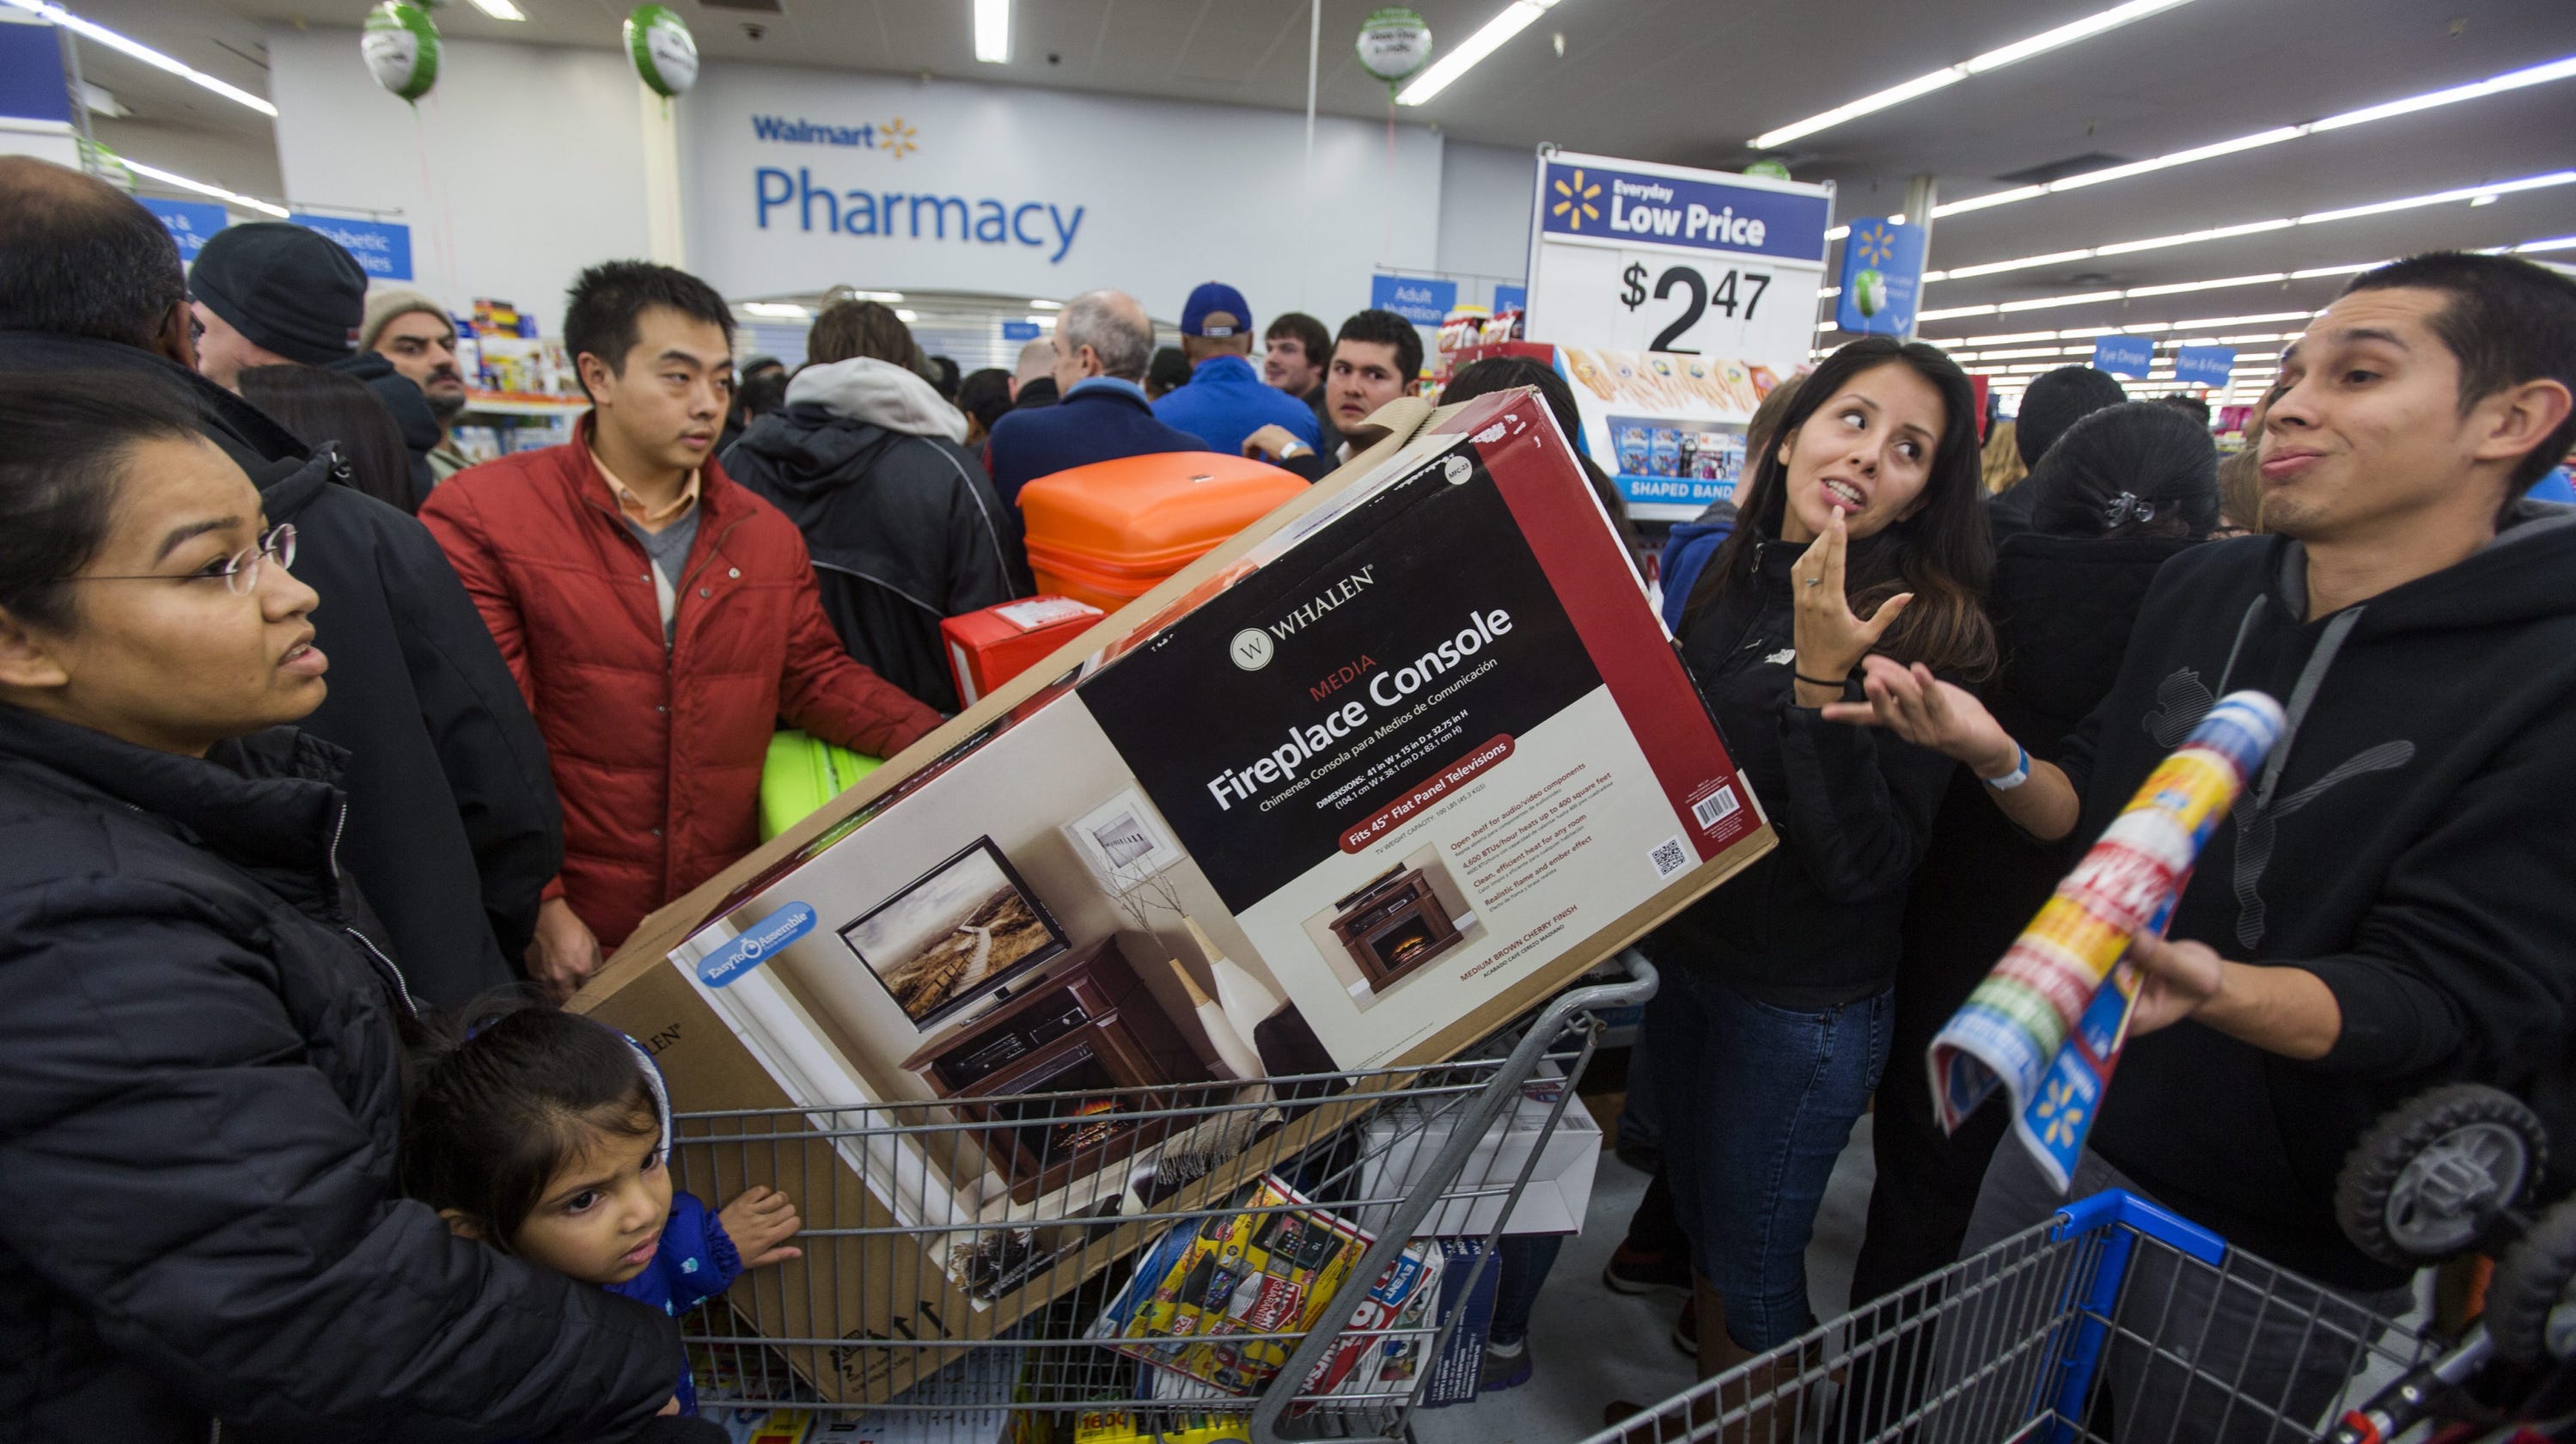 What if you miss the Black Friday doorbusters at Best Buy, Kohls and Walmart?